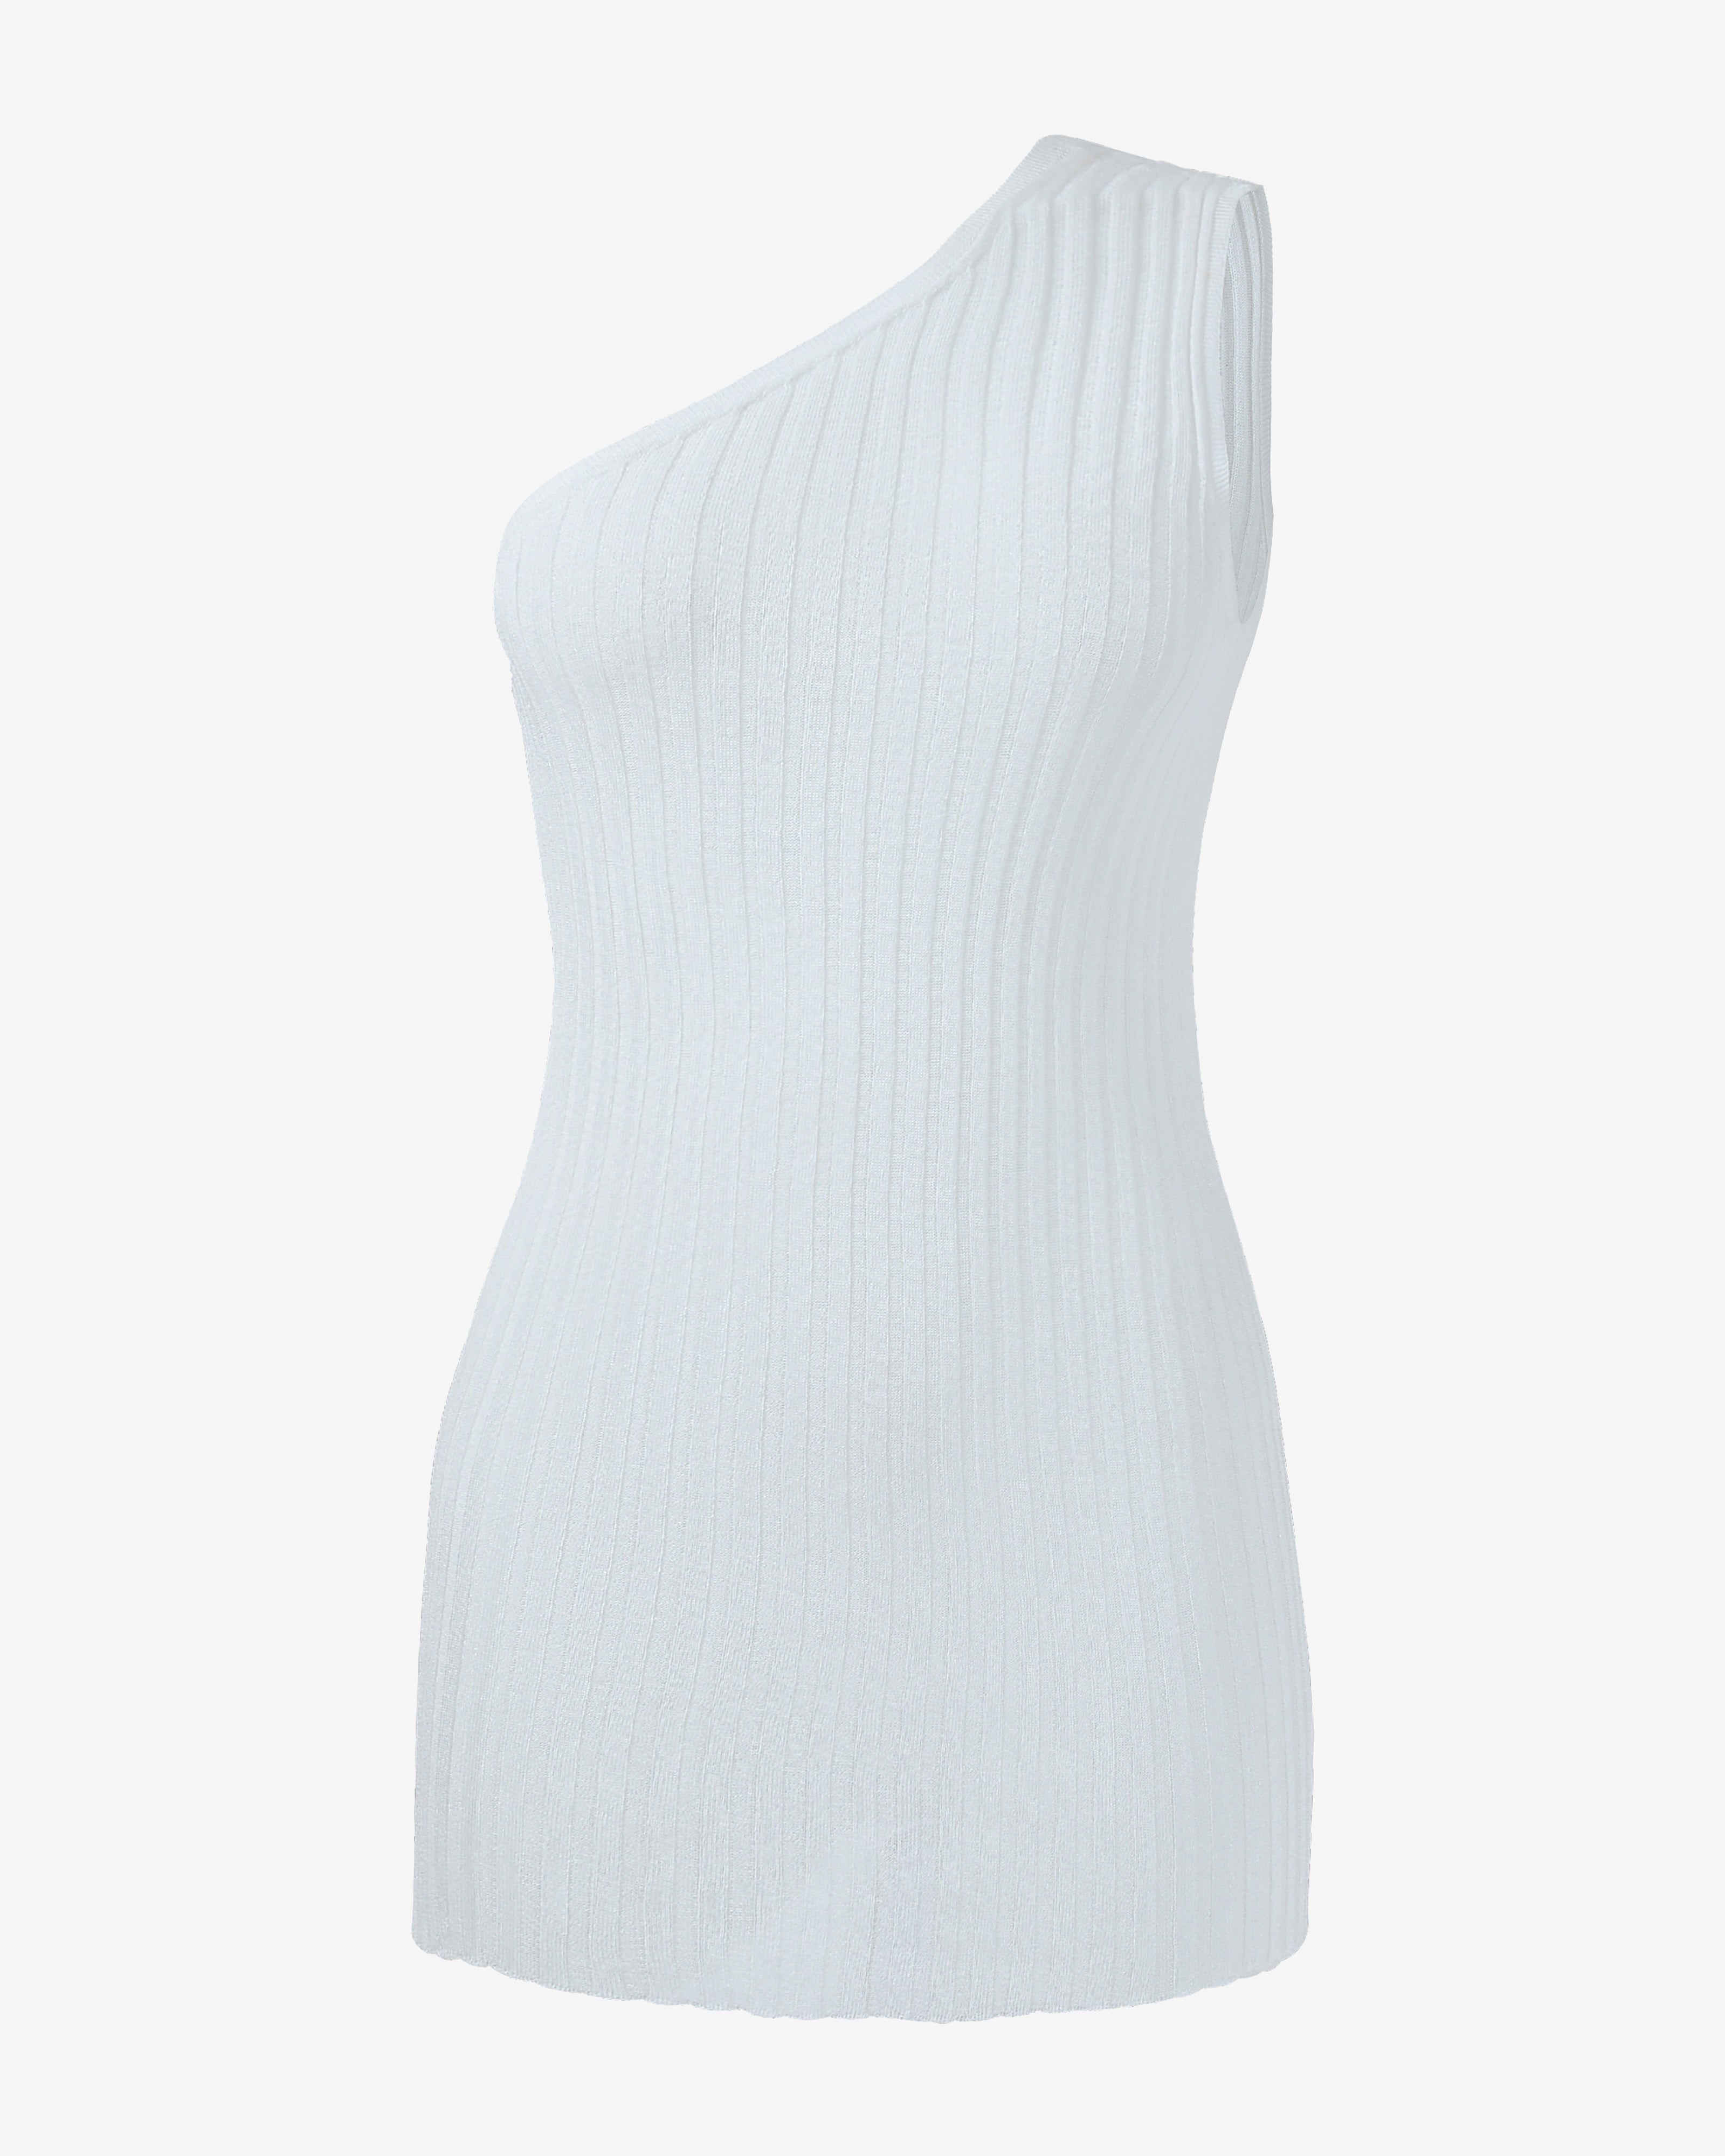 The Rib Knit One Shoulder Top - White